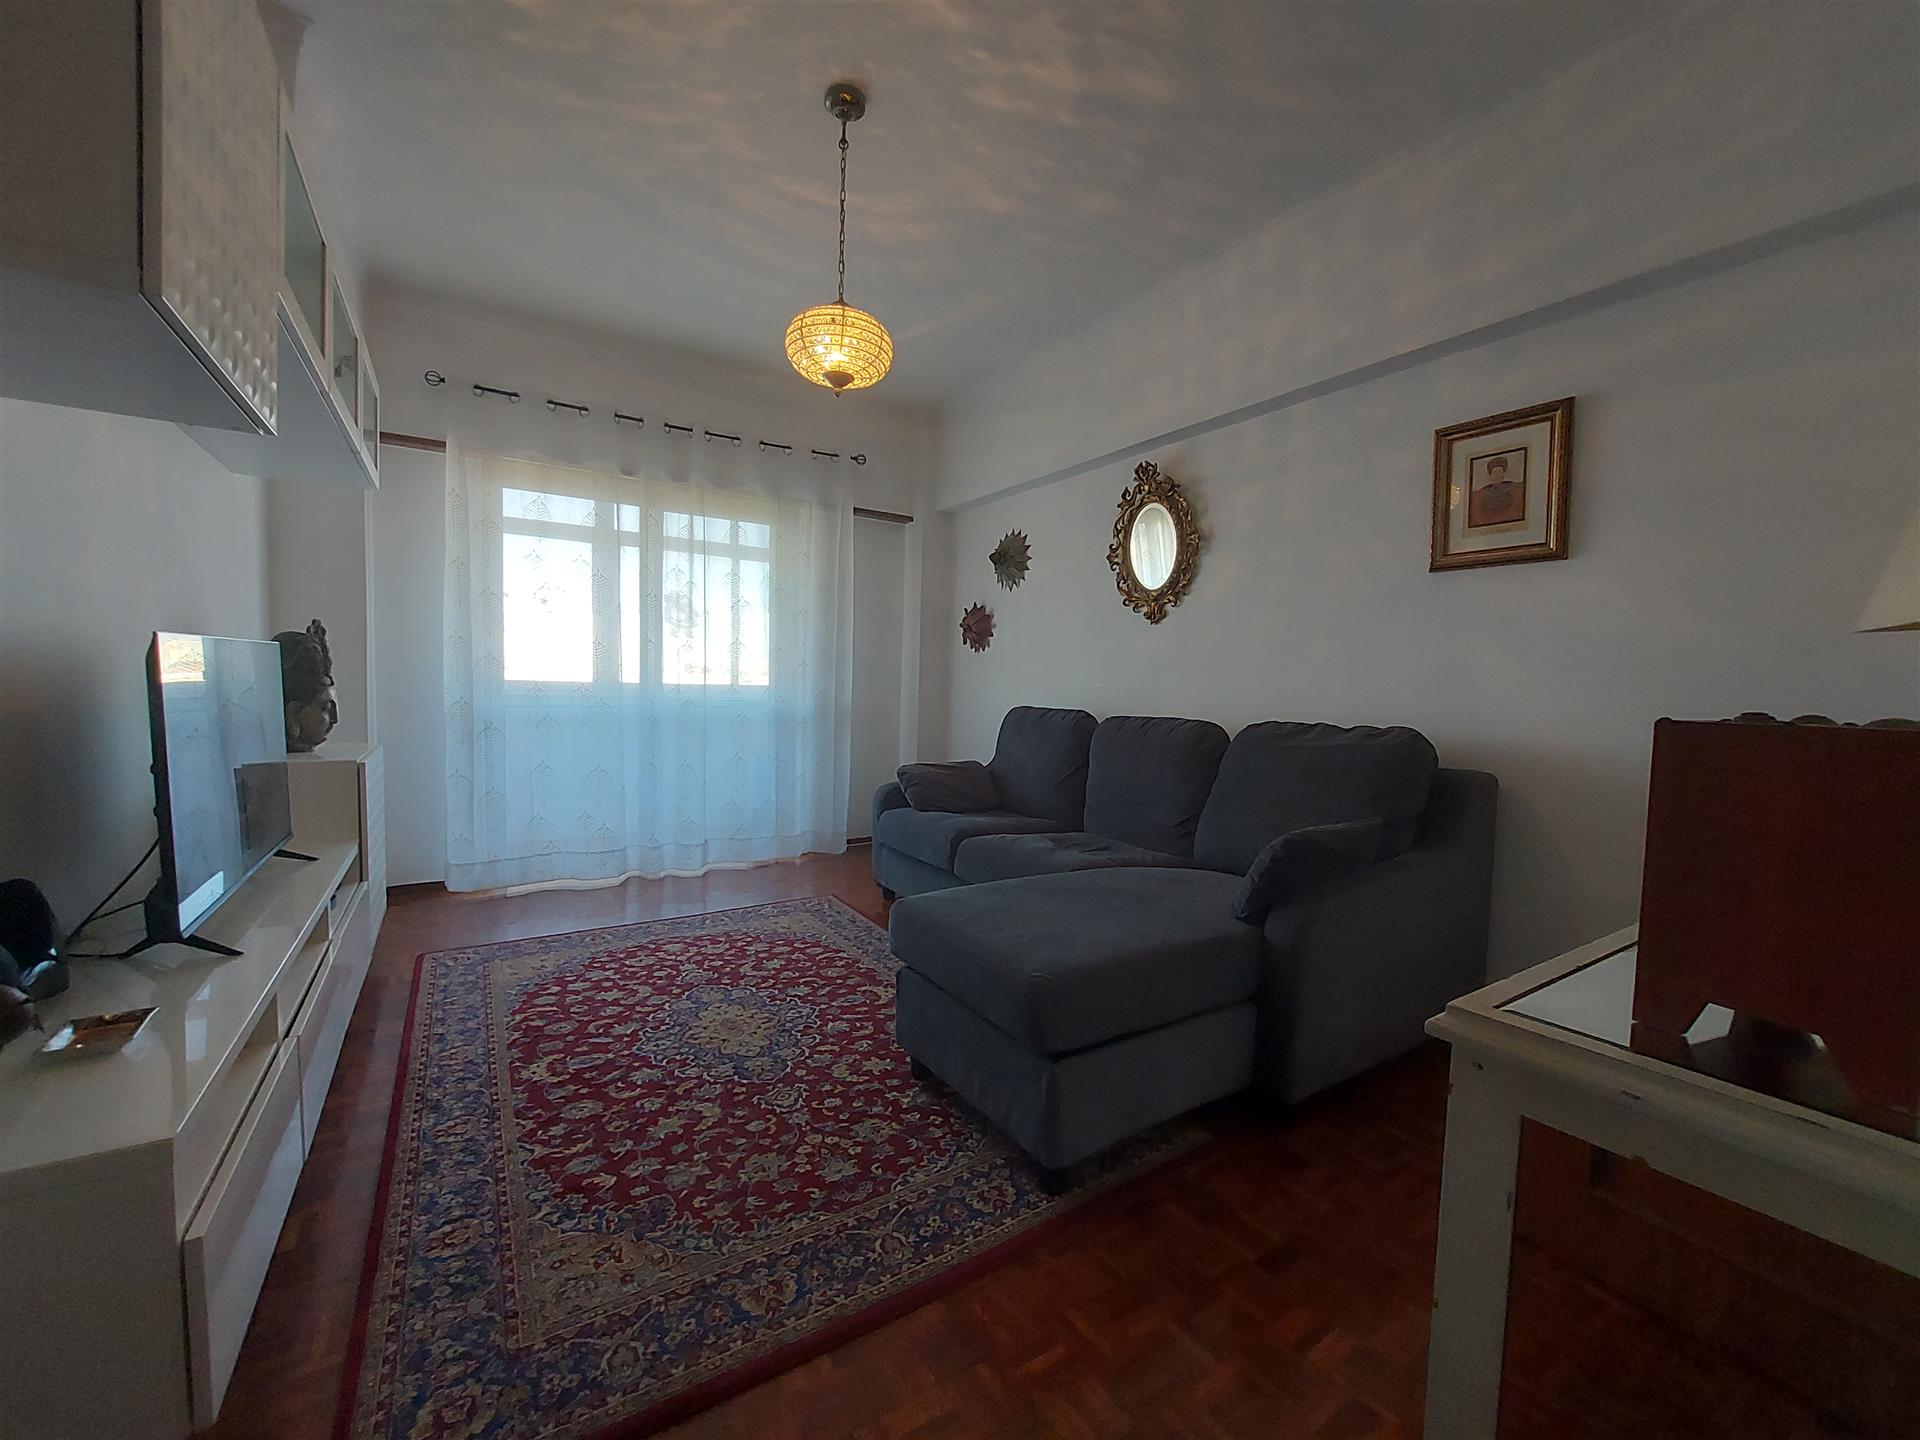 3 bedroom apartment with elevator in the center of Amadora